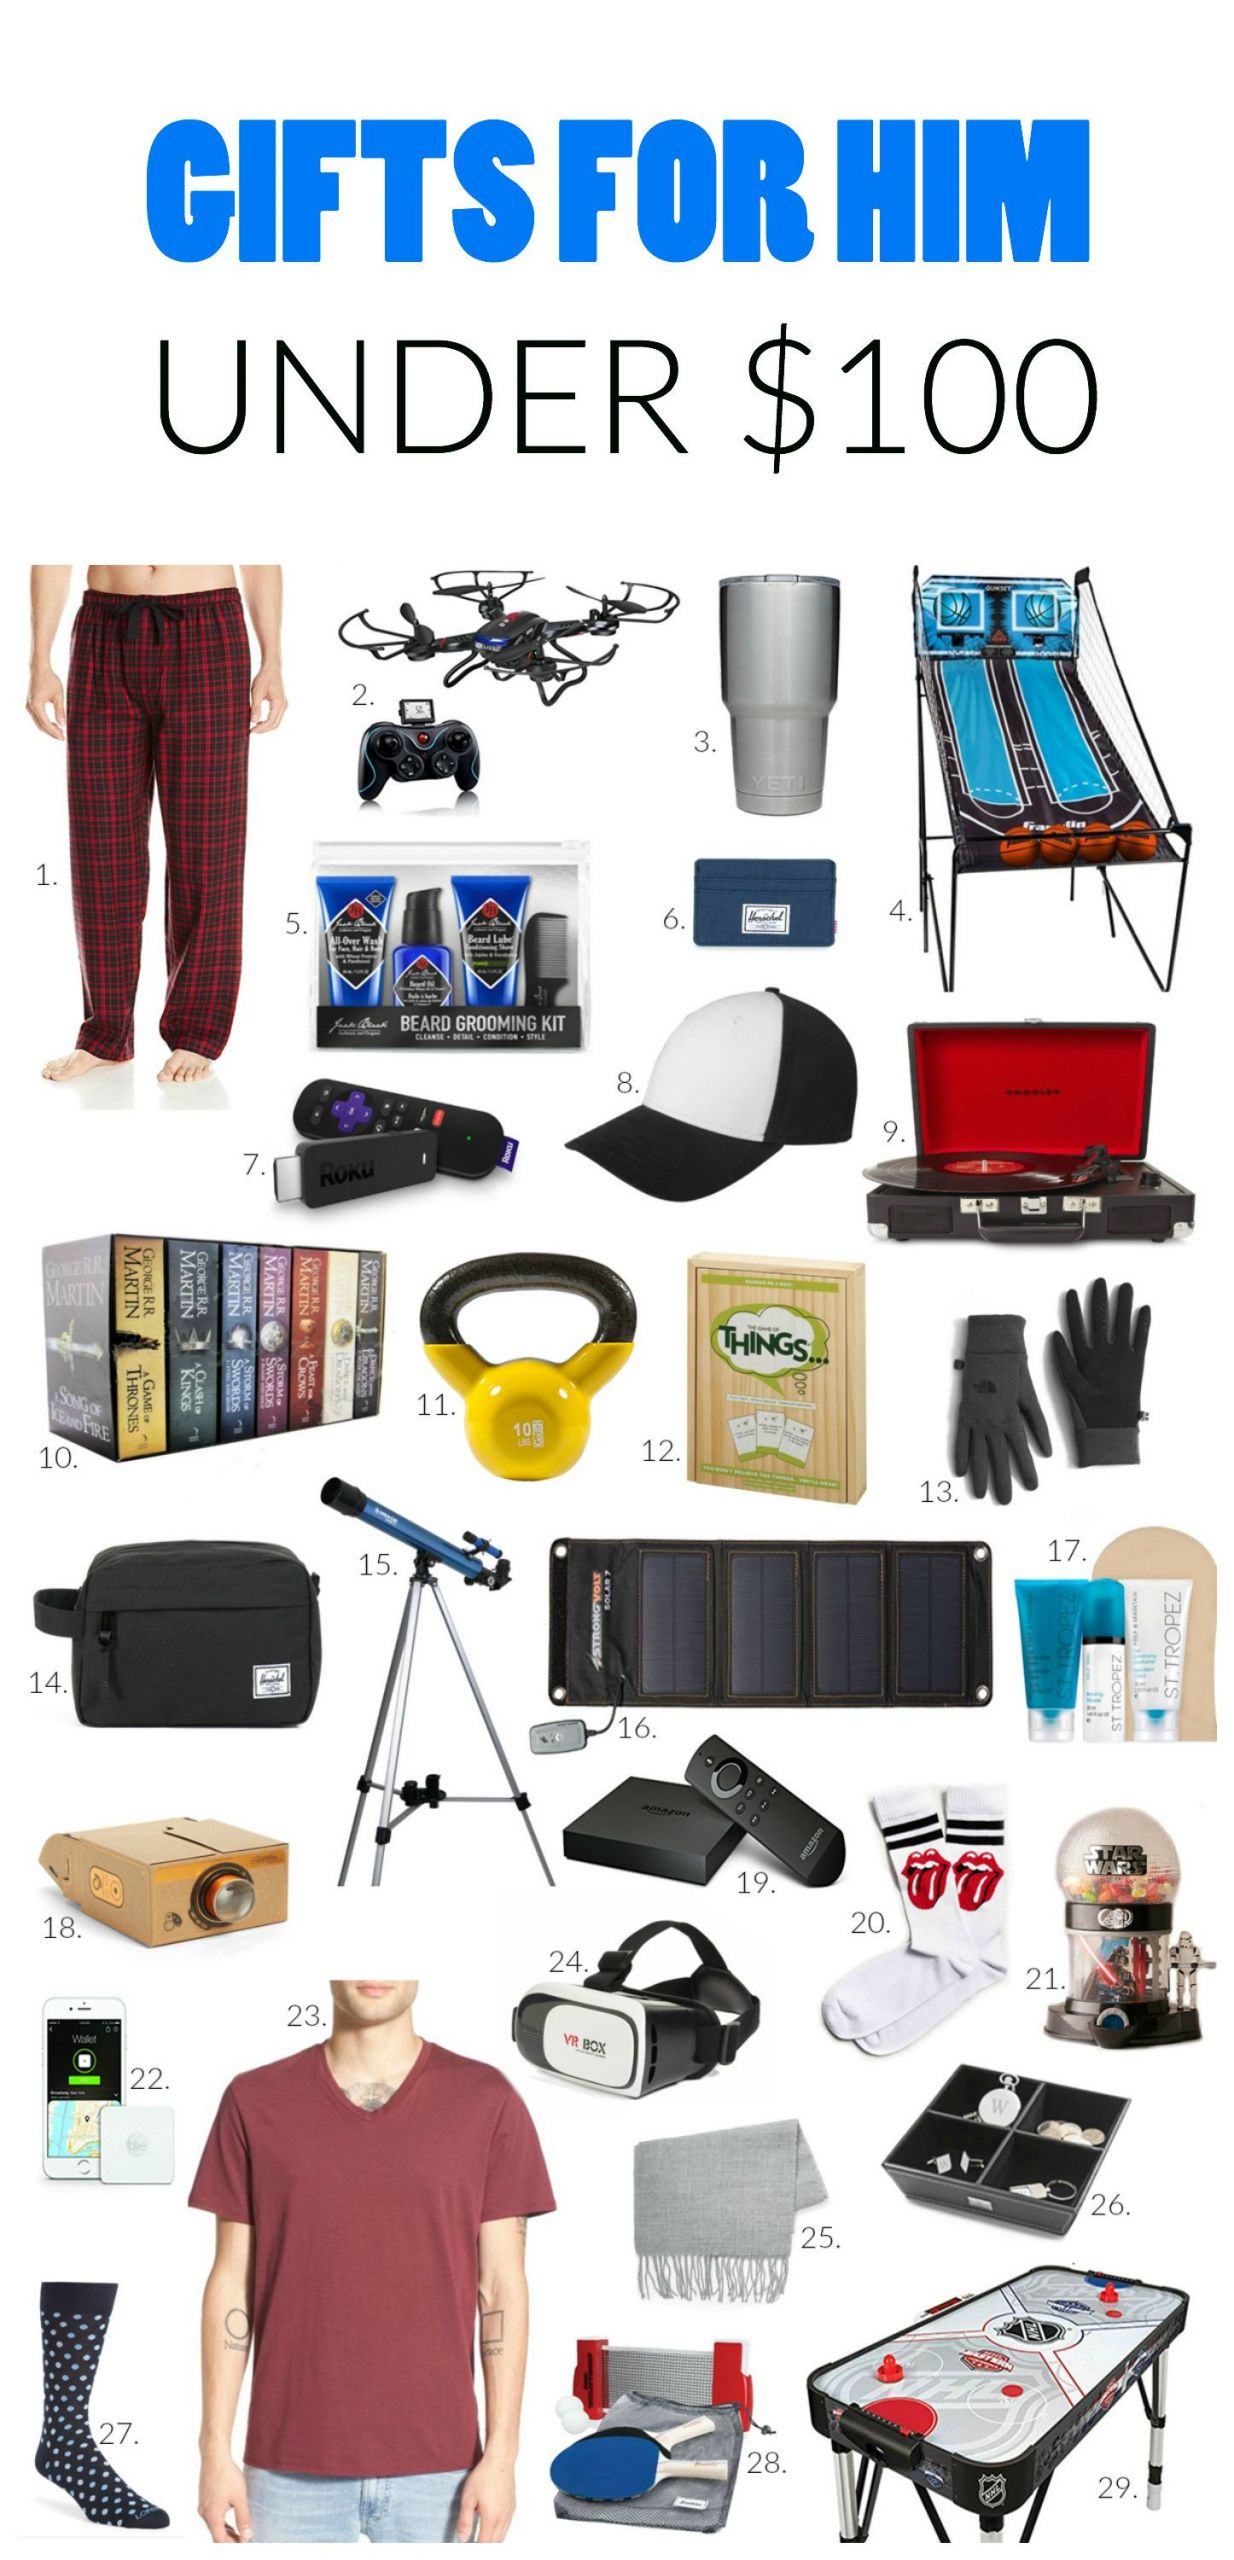 Birthday Gift Ideas For Guy Friend
 Gift Ideas for Him Under $100 With images